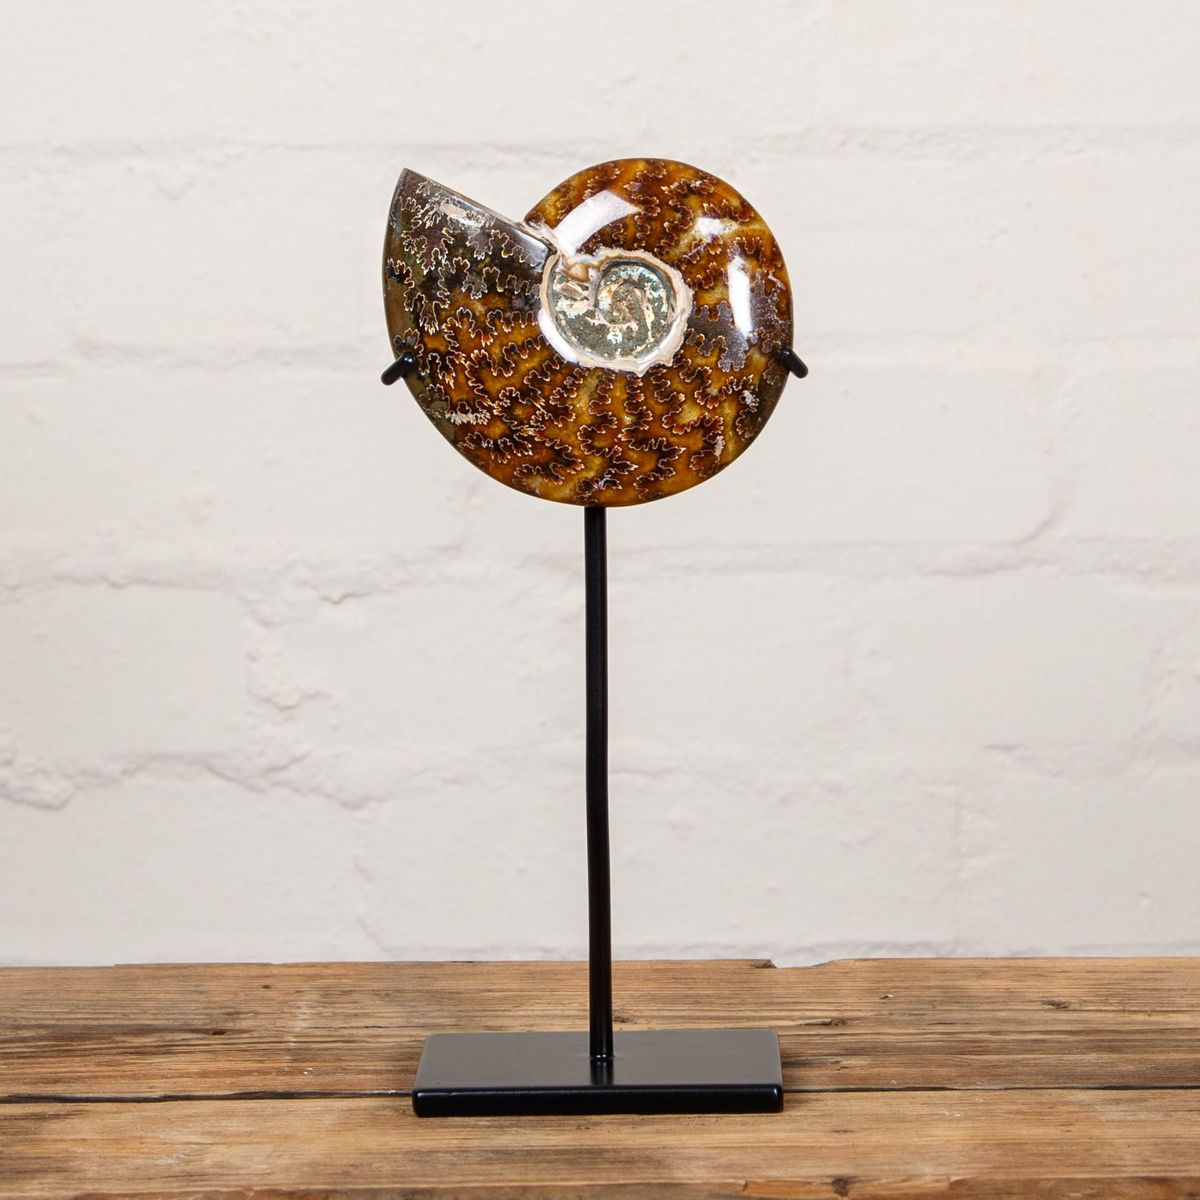 Minibeast 4.5 inch Whole Polished Ammonite Fossil on Stand (Cleoniceras sp)